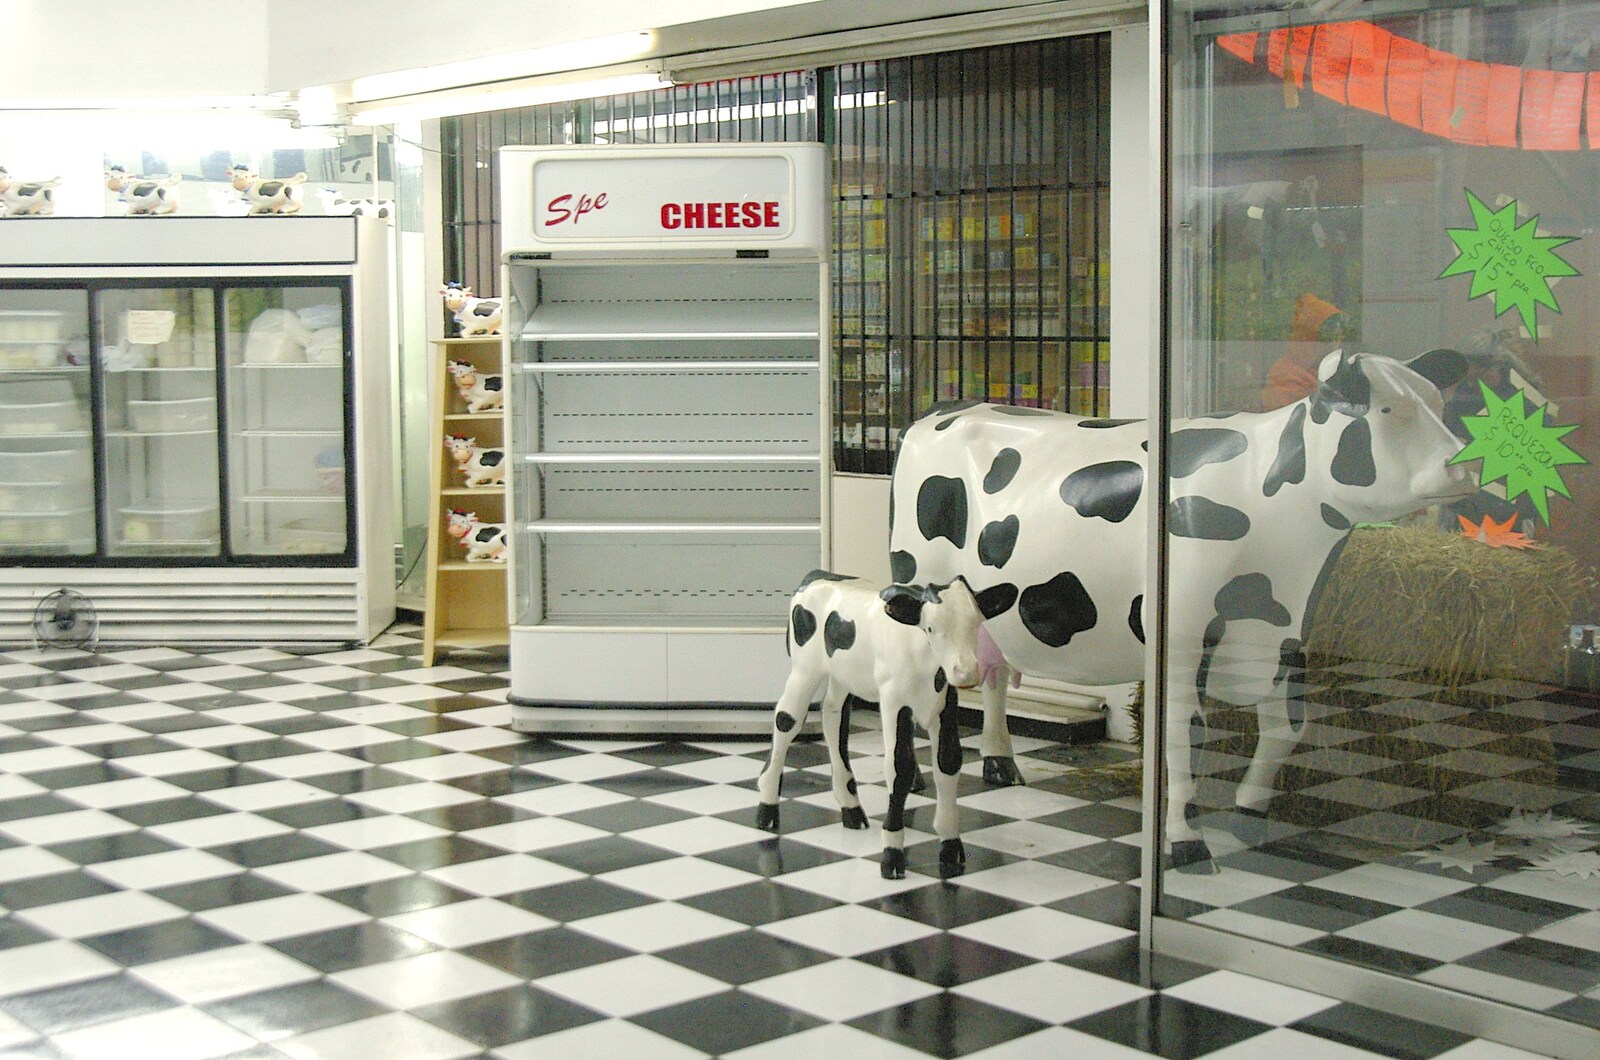 Black and white cows in a dairy shop from A Trip to Tijuana, Mexico - 25th March 2006